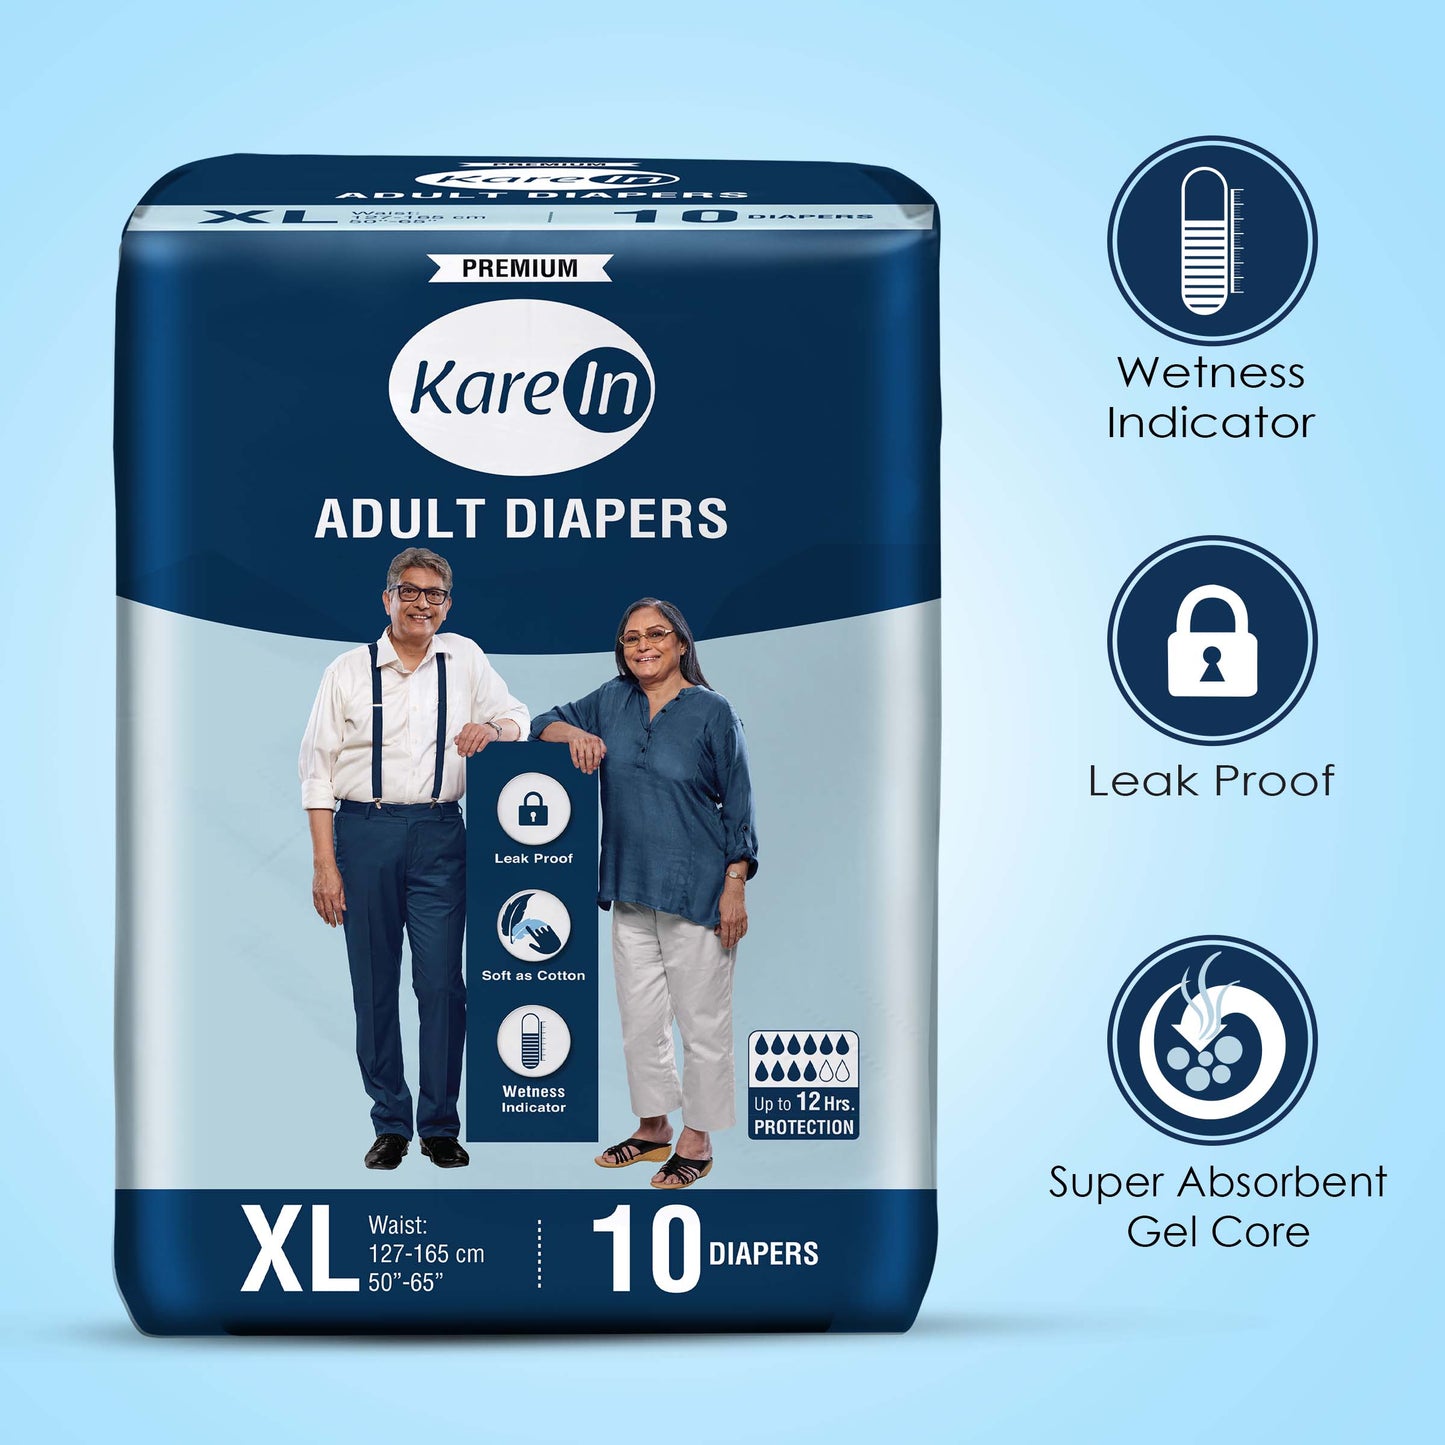 KareIn Premium Adult Diapers, Extra Large, Waist Size127-165 Cm (50"-65"), Tape Style, Unisex, High Absorbency, Leak Proof, Wetness Indicator, Pack of 2, 20 diapers